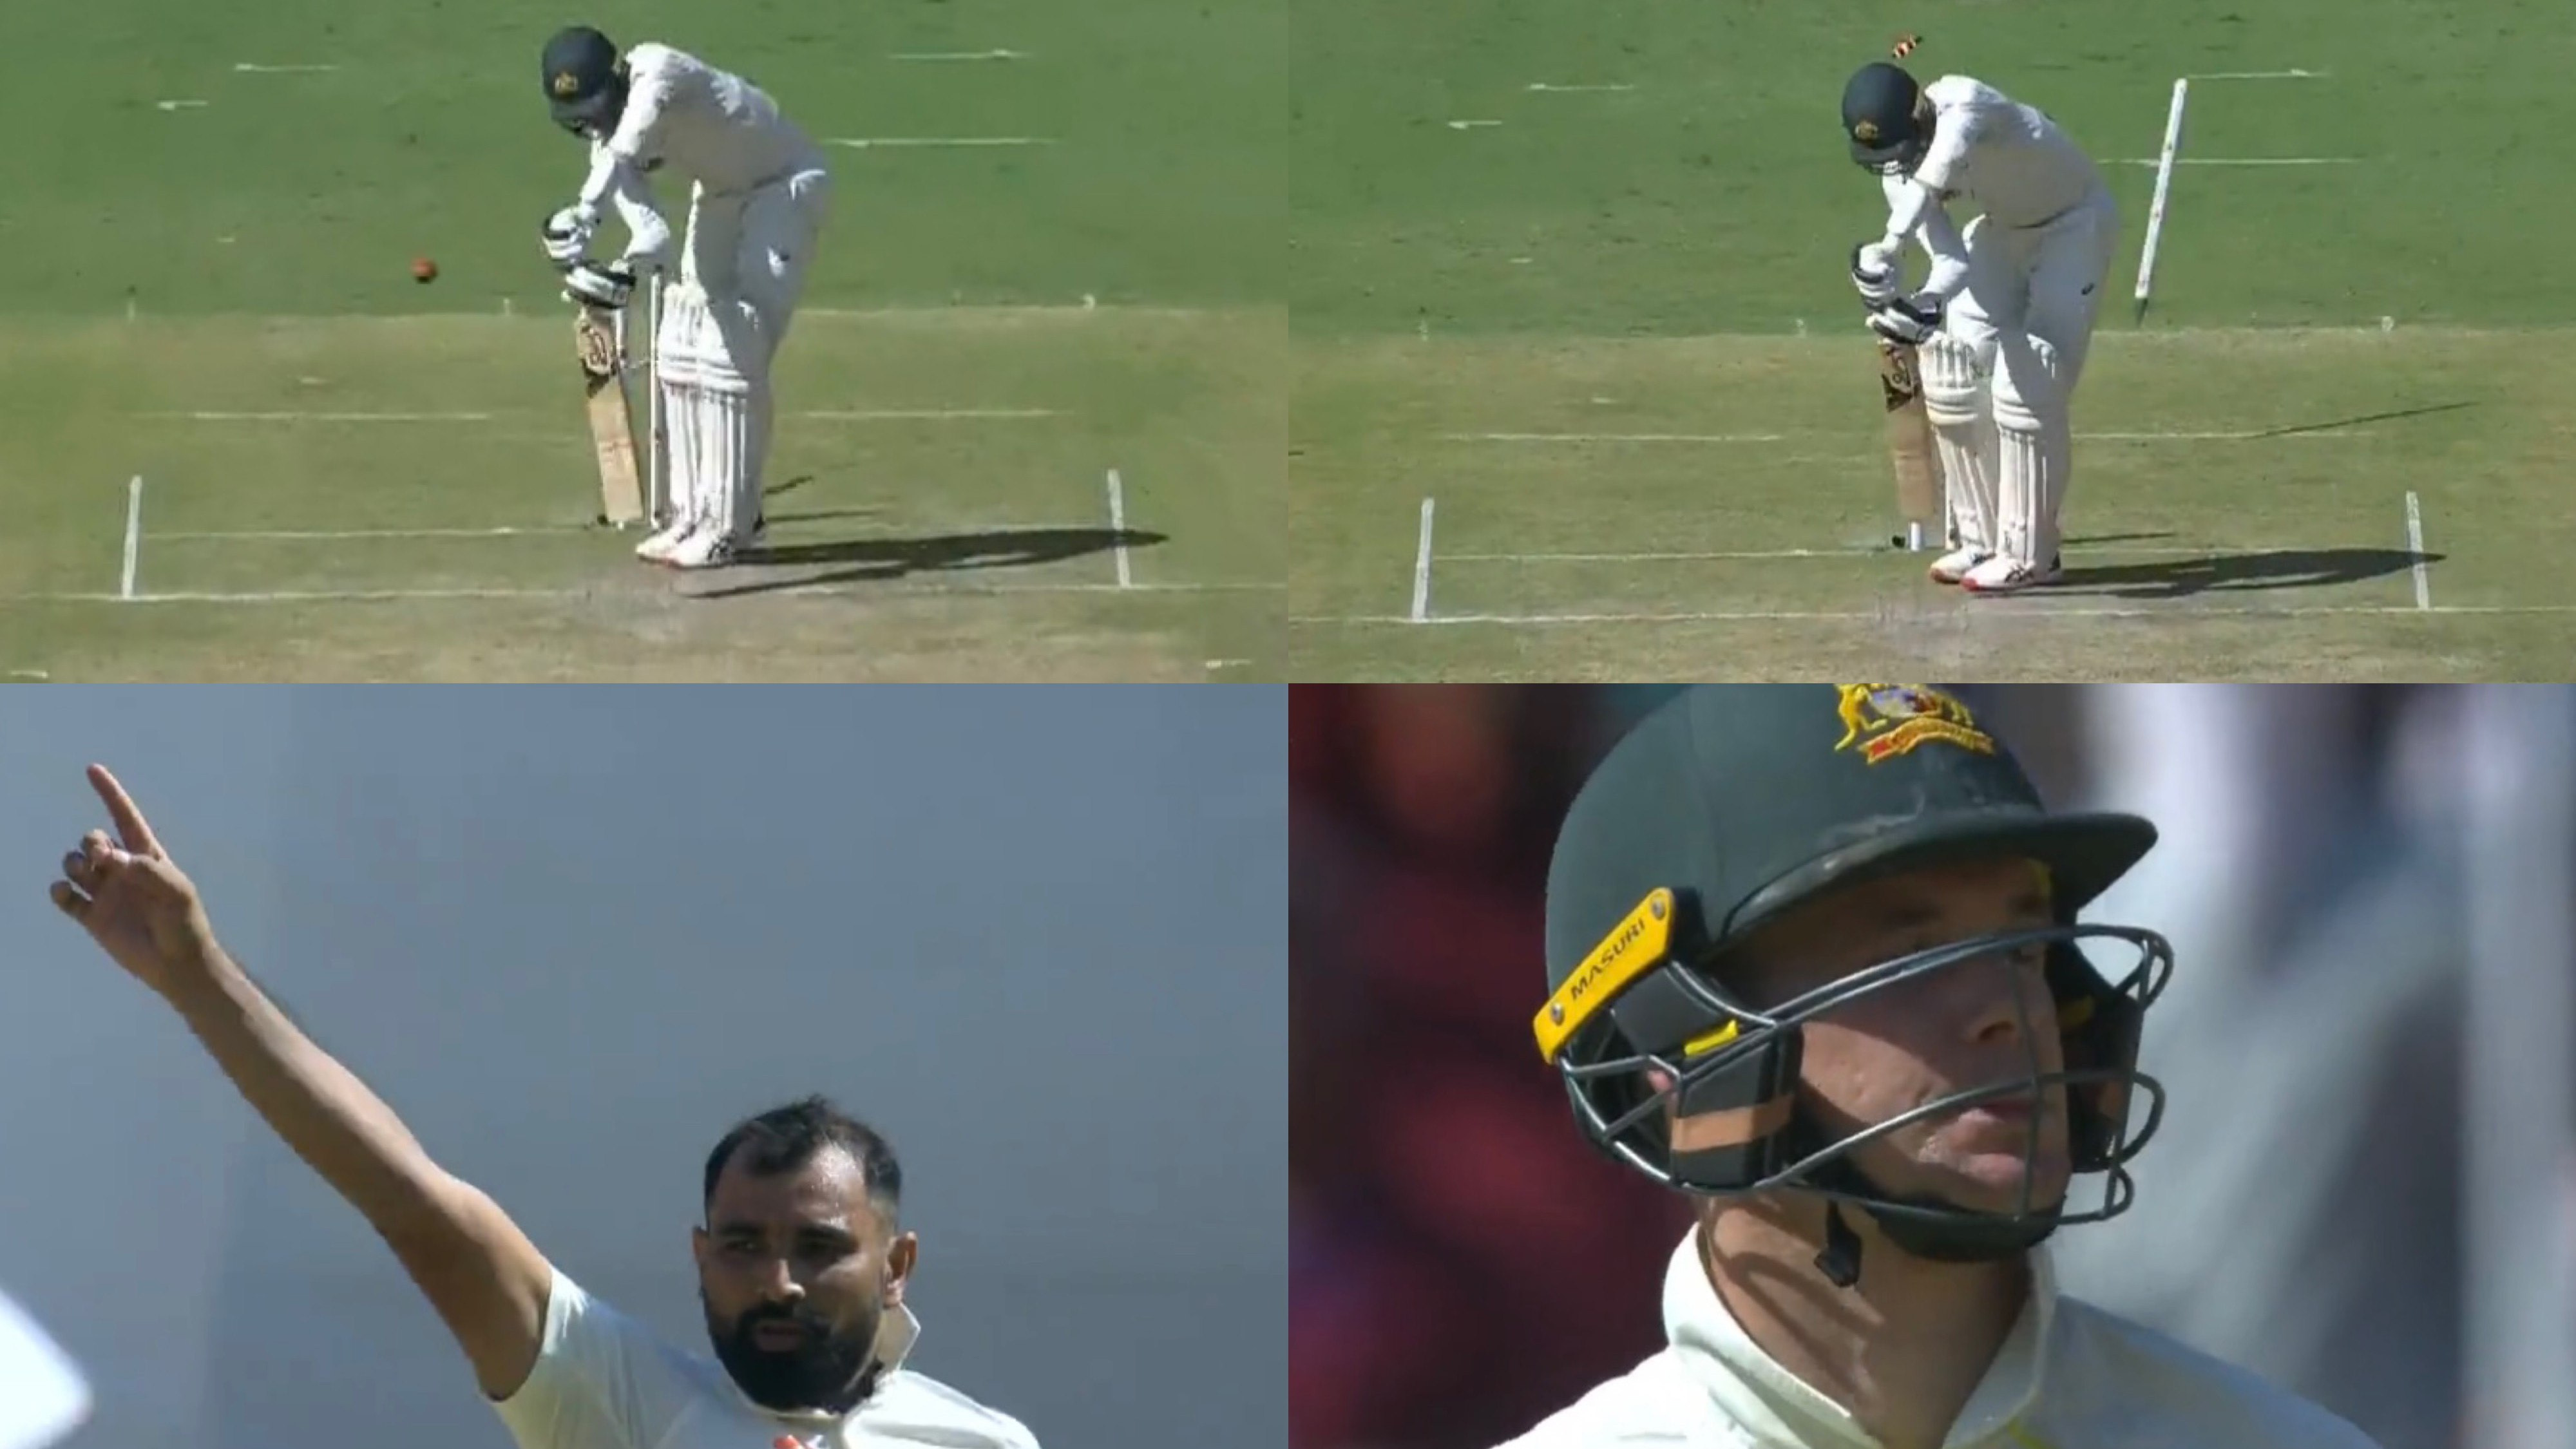 IND v AUS 2023: WATCH - Mohammad Shami sends Peter Handscomb's off-stump for a walk with a peach